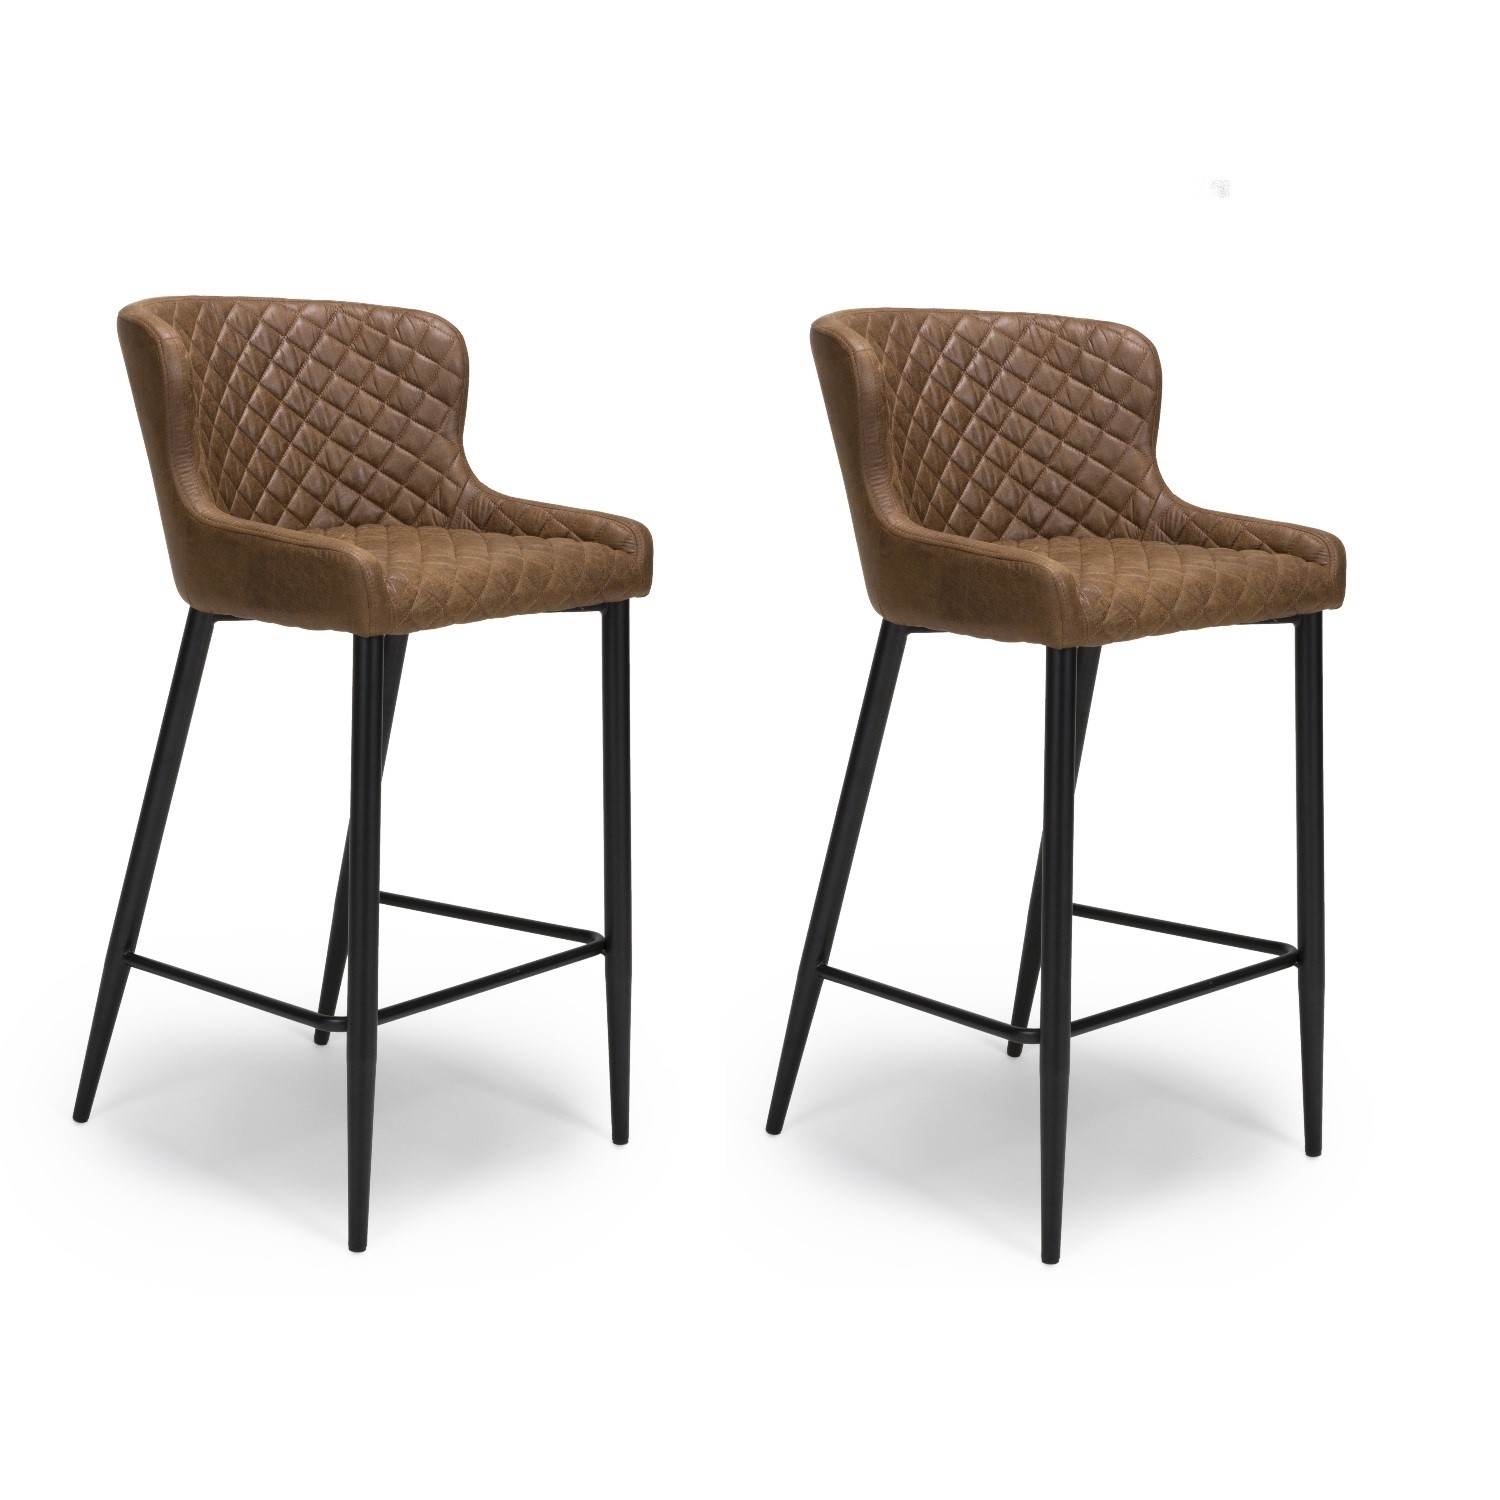 Brown Antique Faux Leather Bar Stools, Faux Leather Kitchen Stools